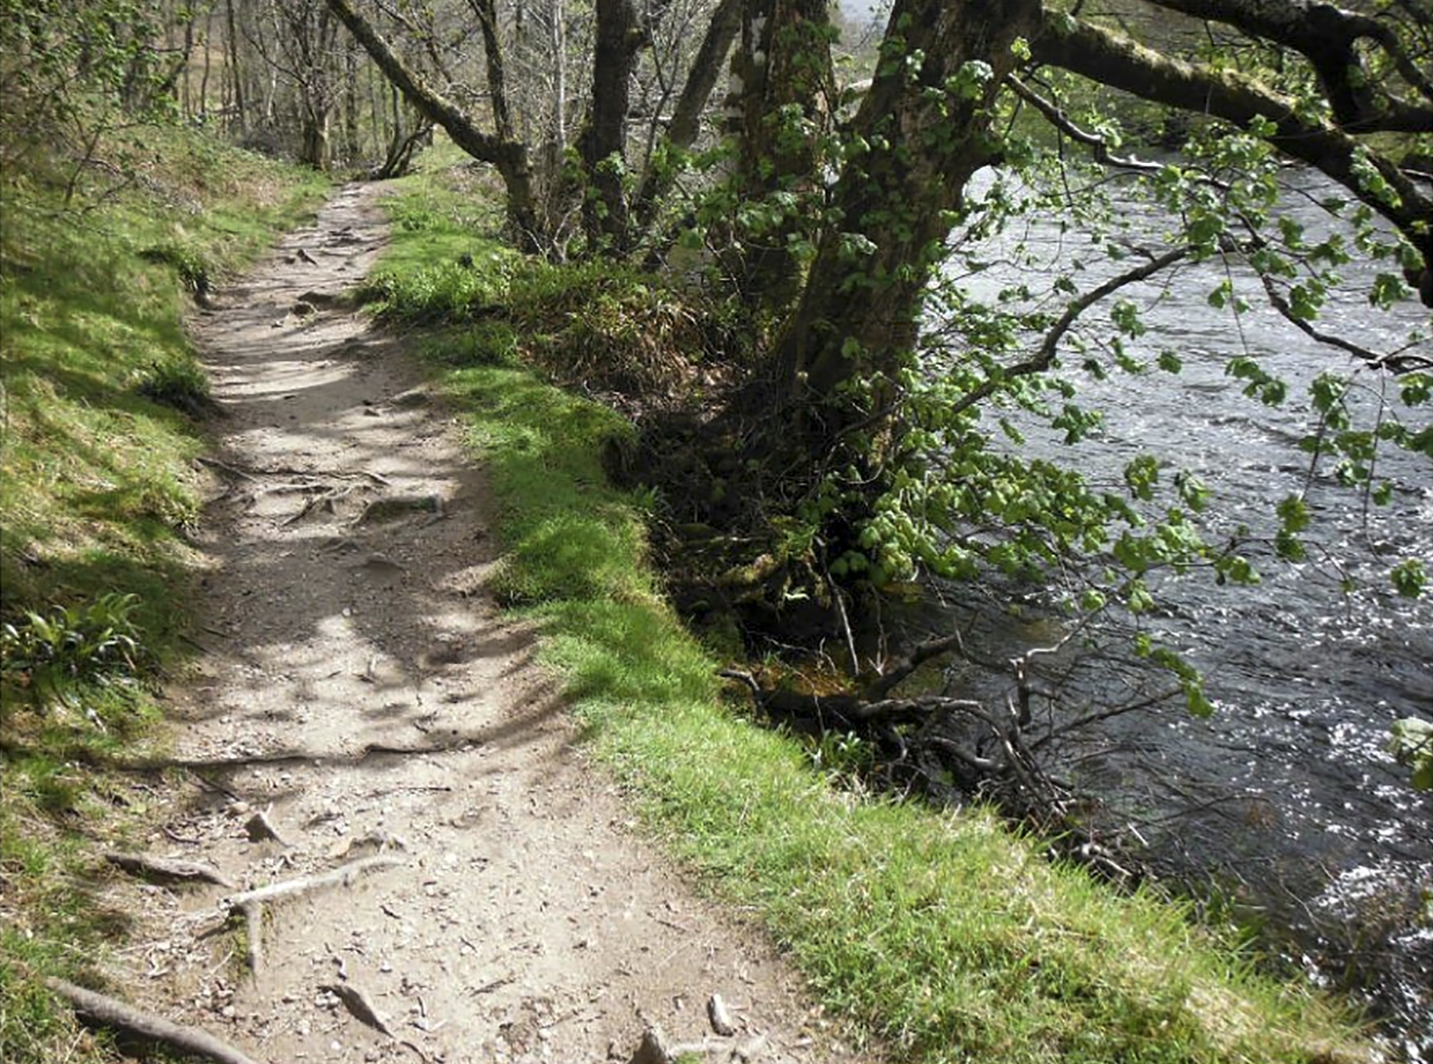 The existing footpath alongside the River Nevis is too narrow, frequently muddy and roots create barriers for elderly and less mobile users